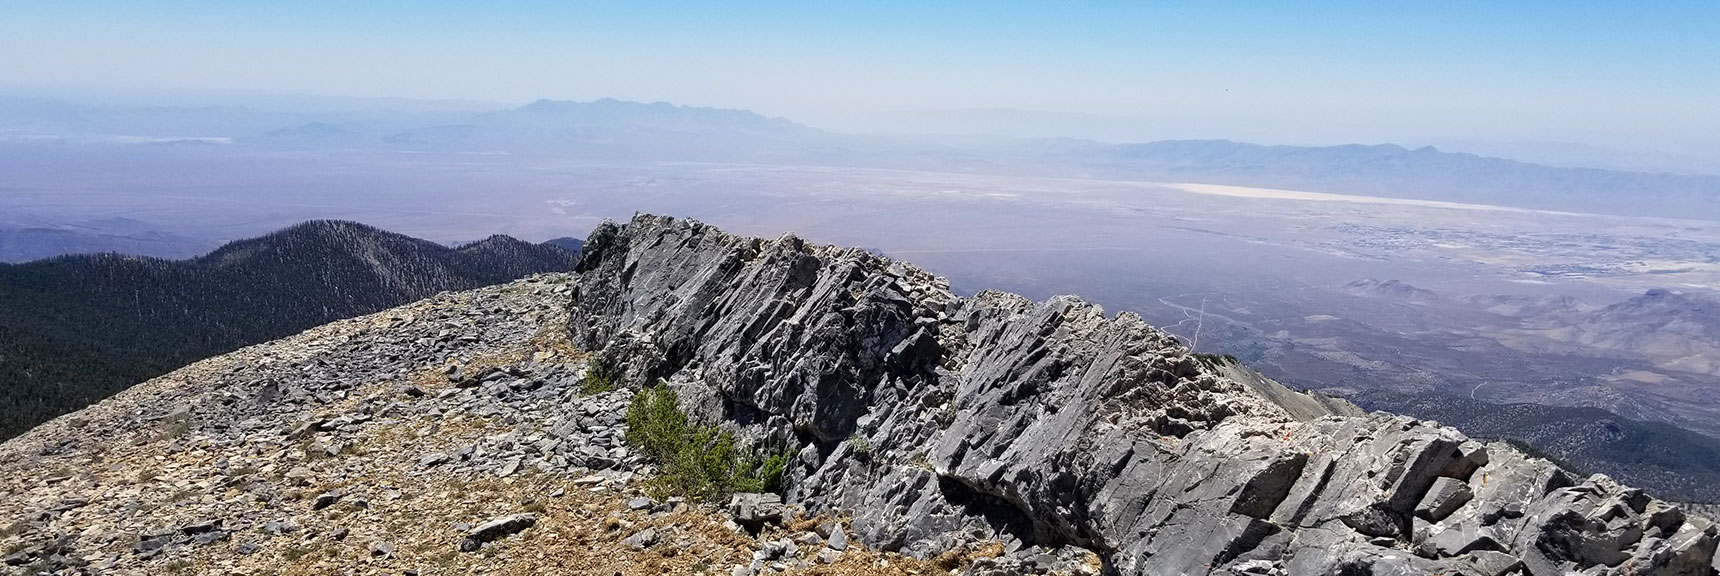 Southern View from Kyle Canyon Summit